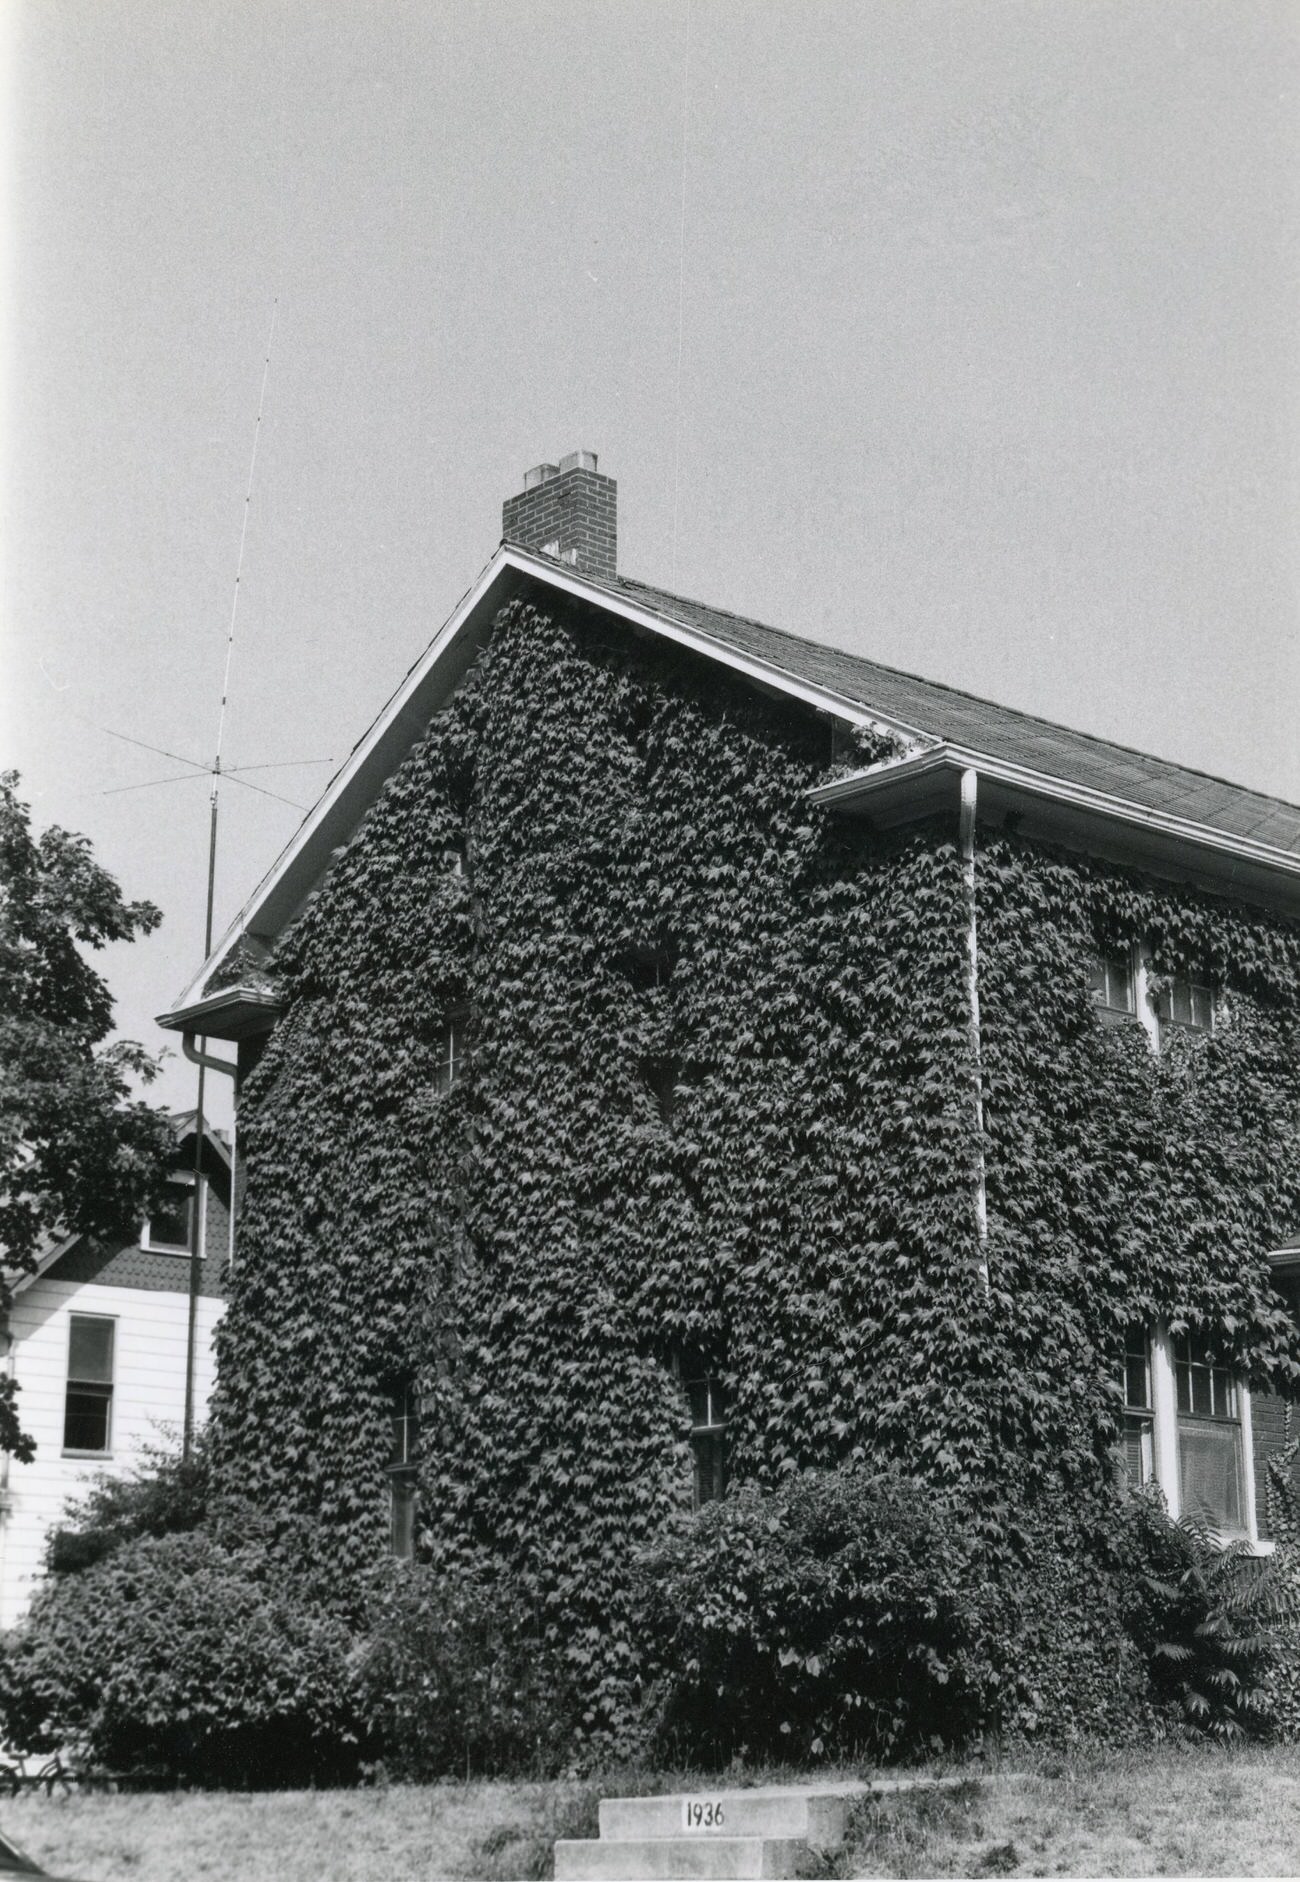 1936 Fairmount Ave. in Hilltop, included in the Greater Hilltop Area Commission's guide, 1980s.